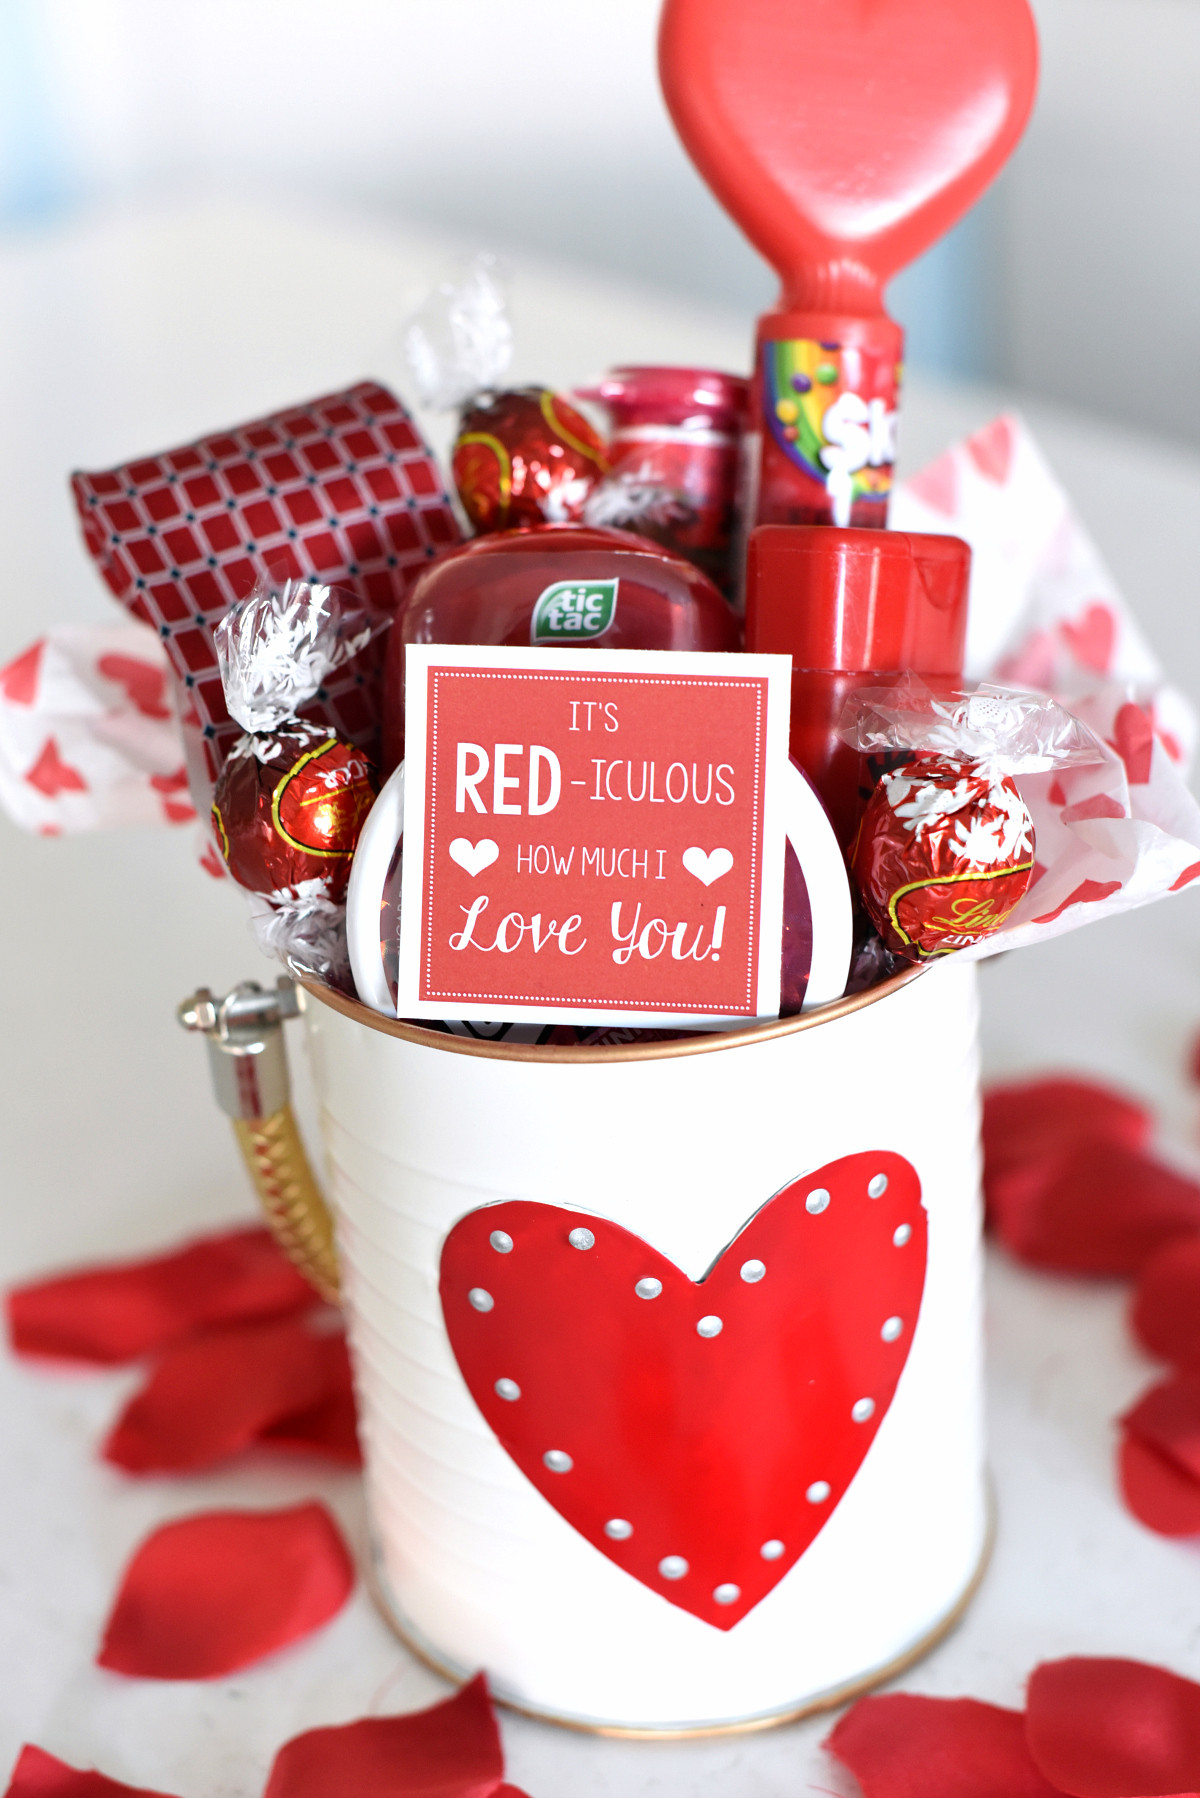 Valentine Day Gift For Husband Ideas
 Cute Valentine s Day Gift Idea RED iculous Basket